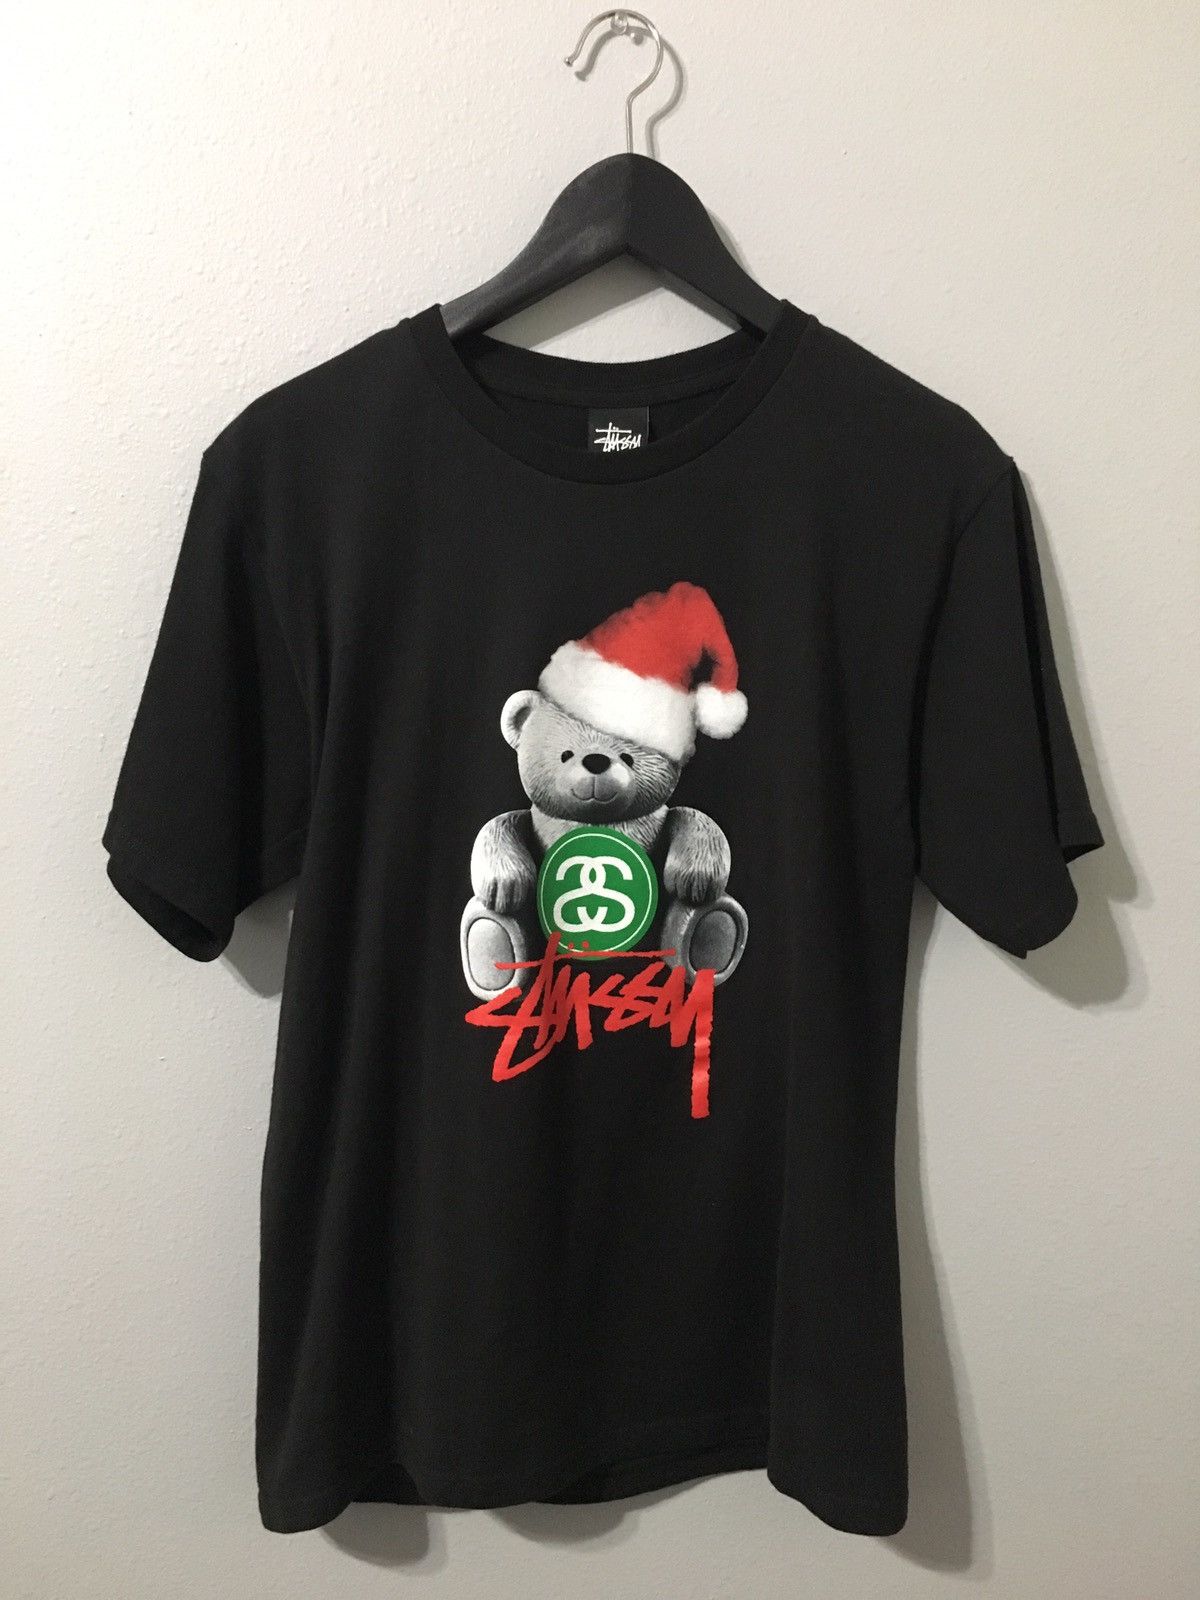 Stussy Christmas Tee Size US S / EU 44-46 / 1 - 1 Preview